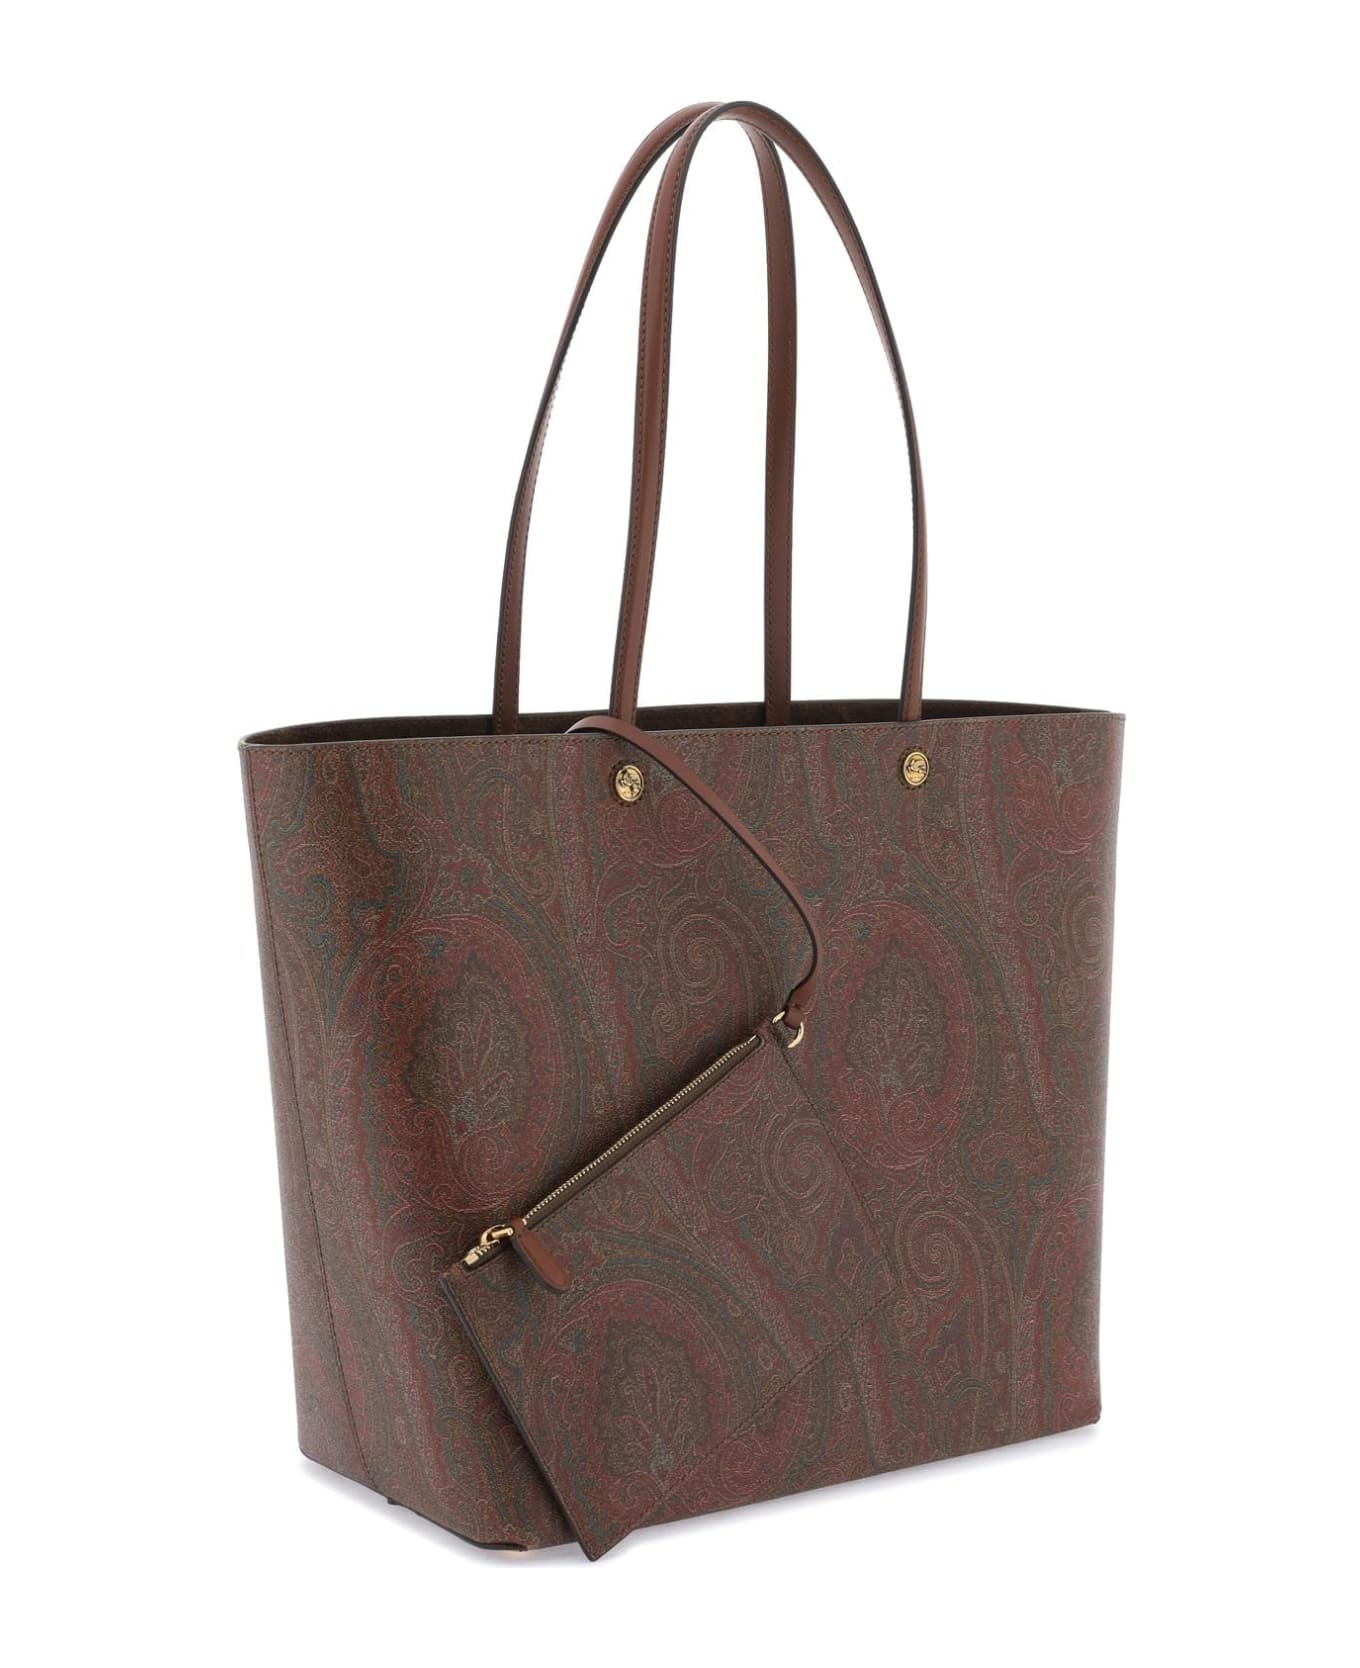 Etro Brown Leather Blend Bag - MARRONE SCURO 2 (Brown)